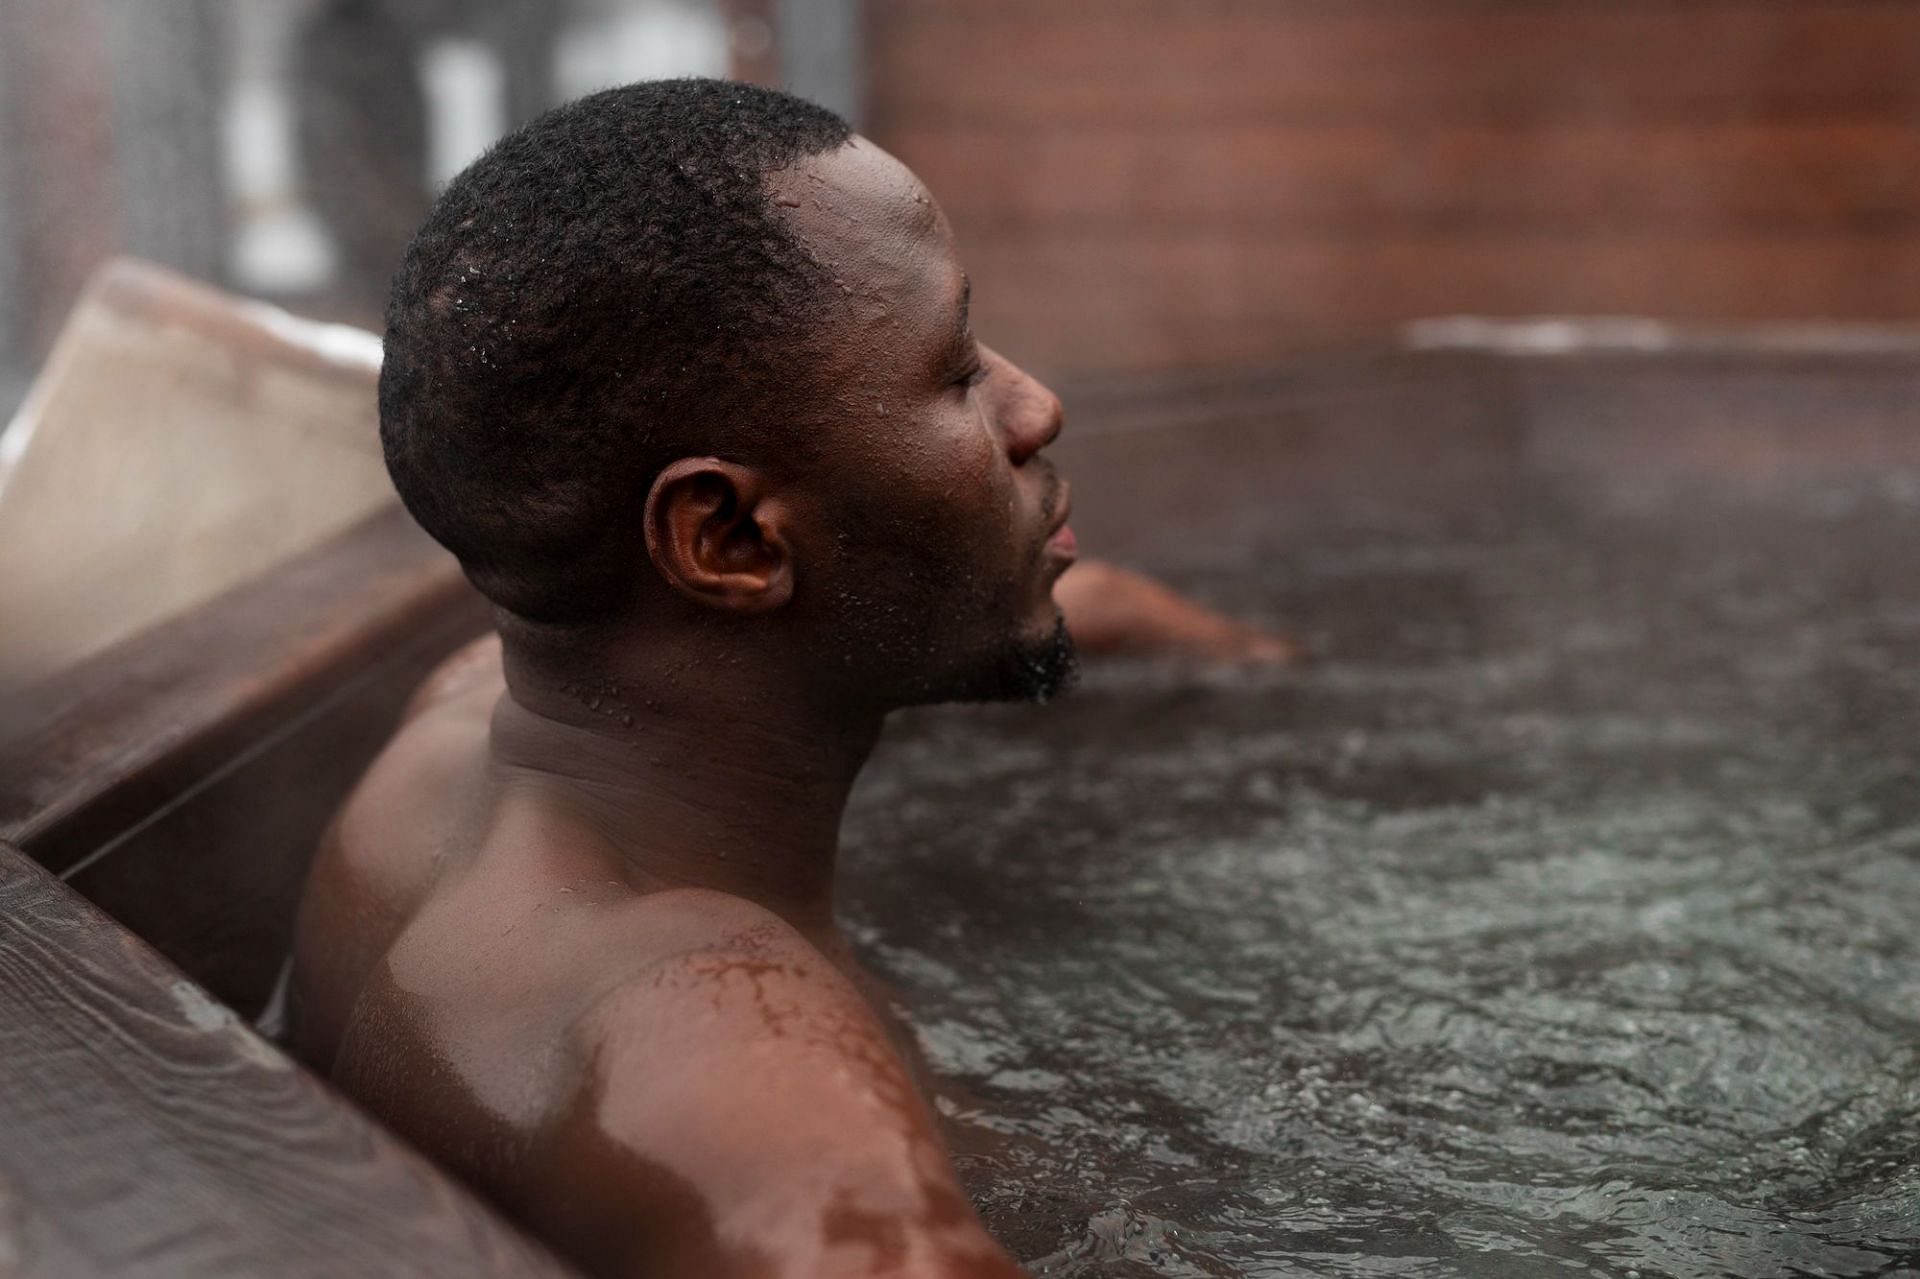 Cold water baths can make you more alert (Image by Freepik)